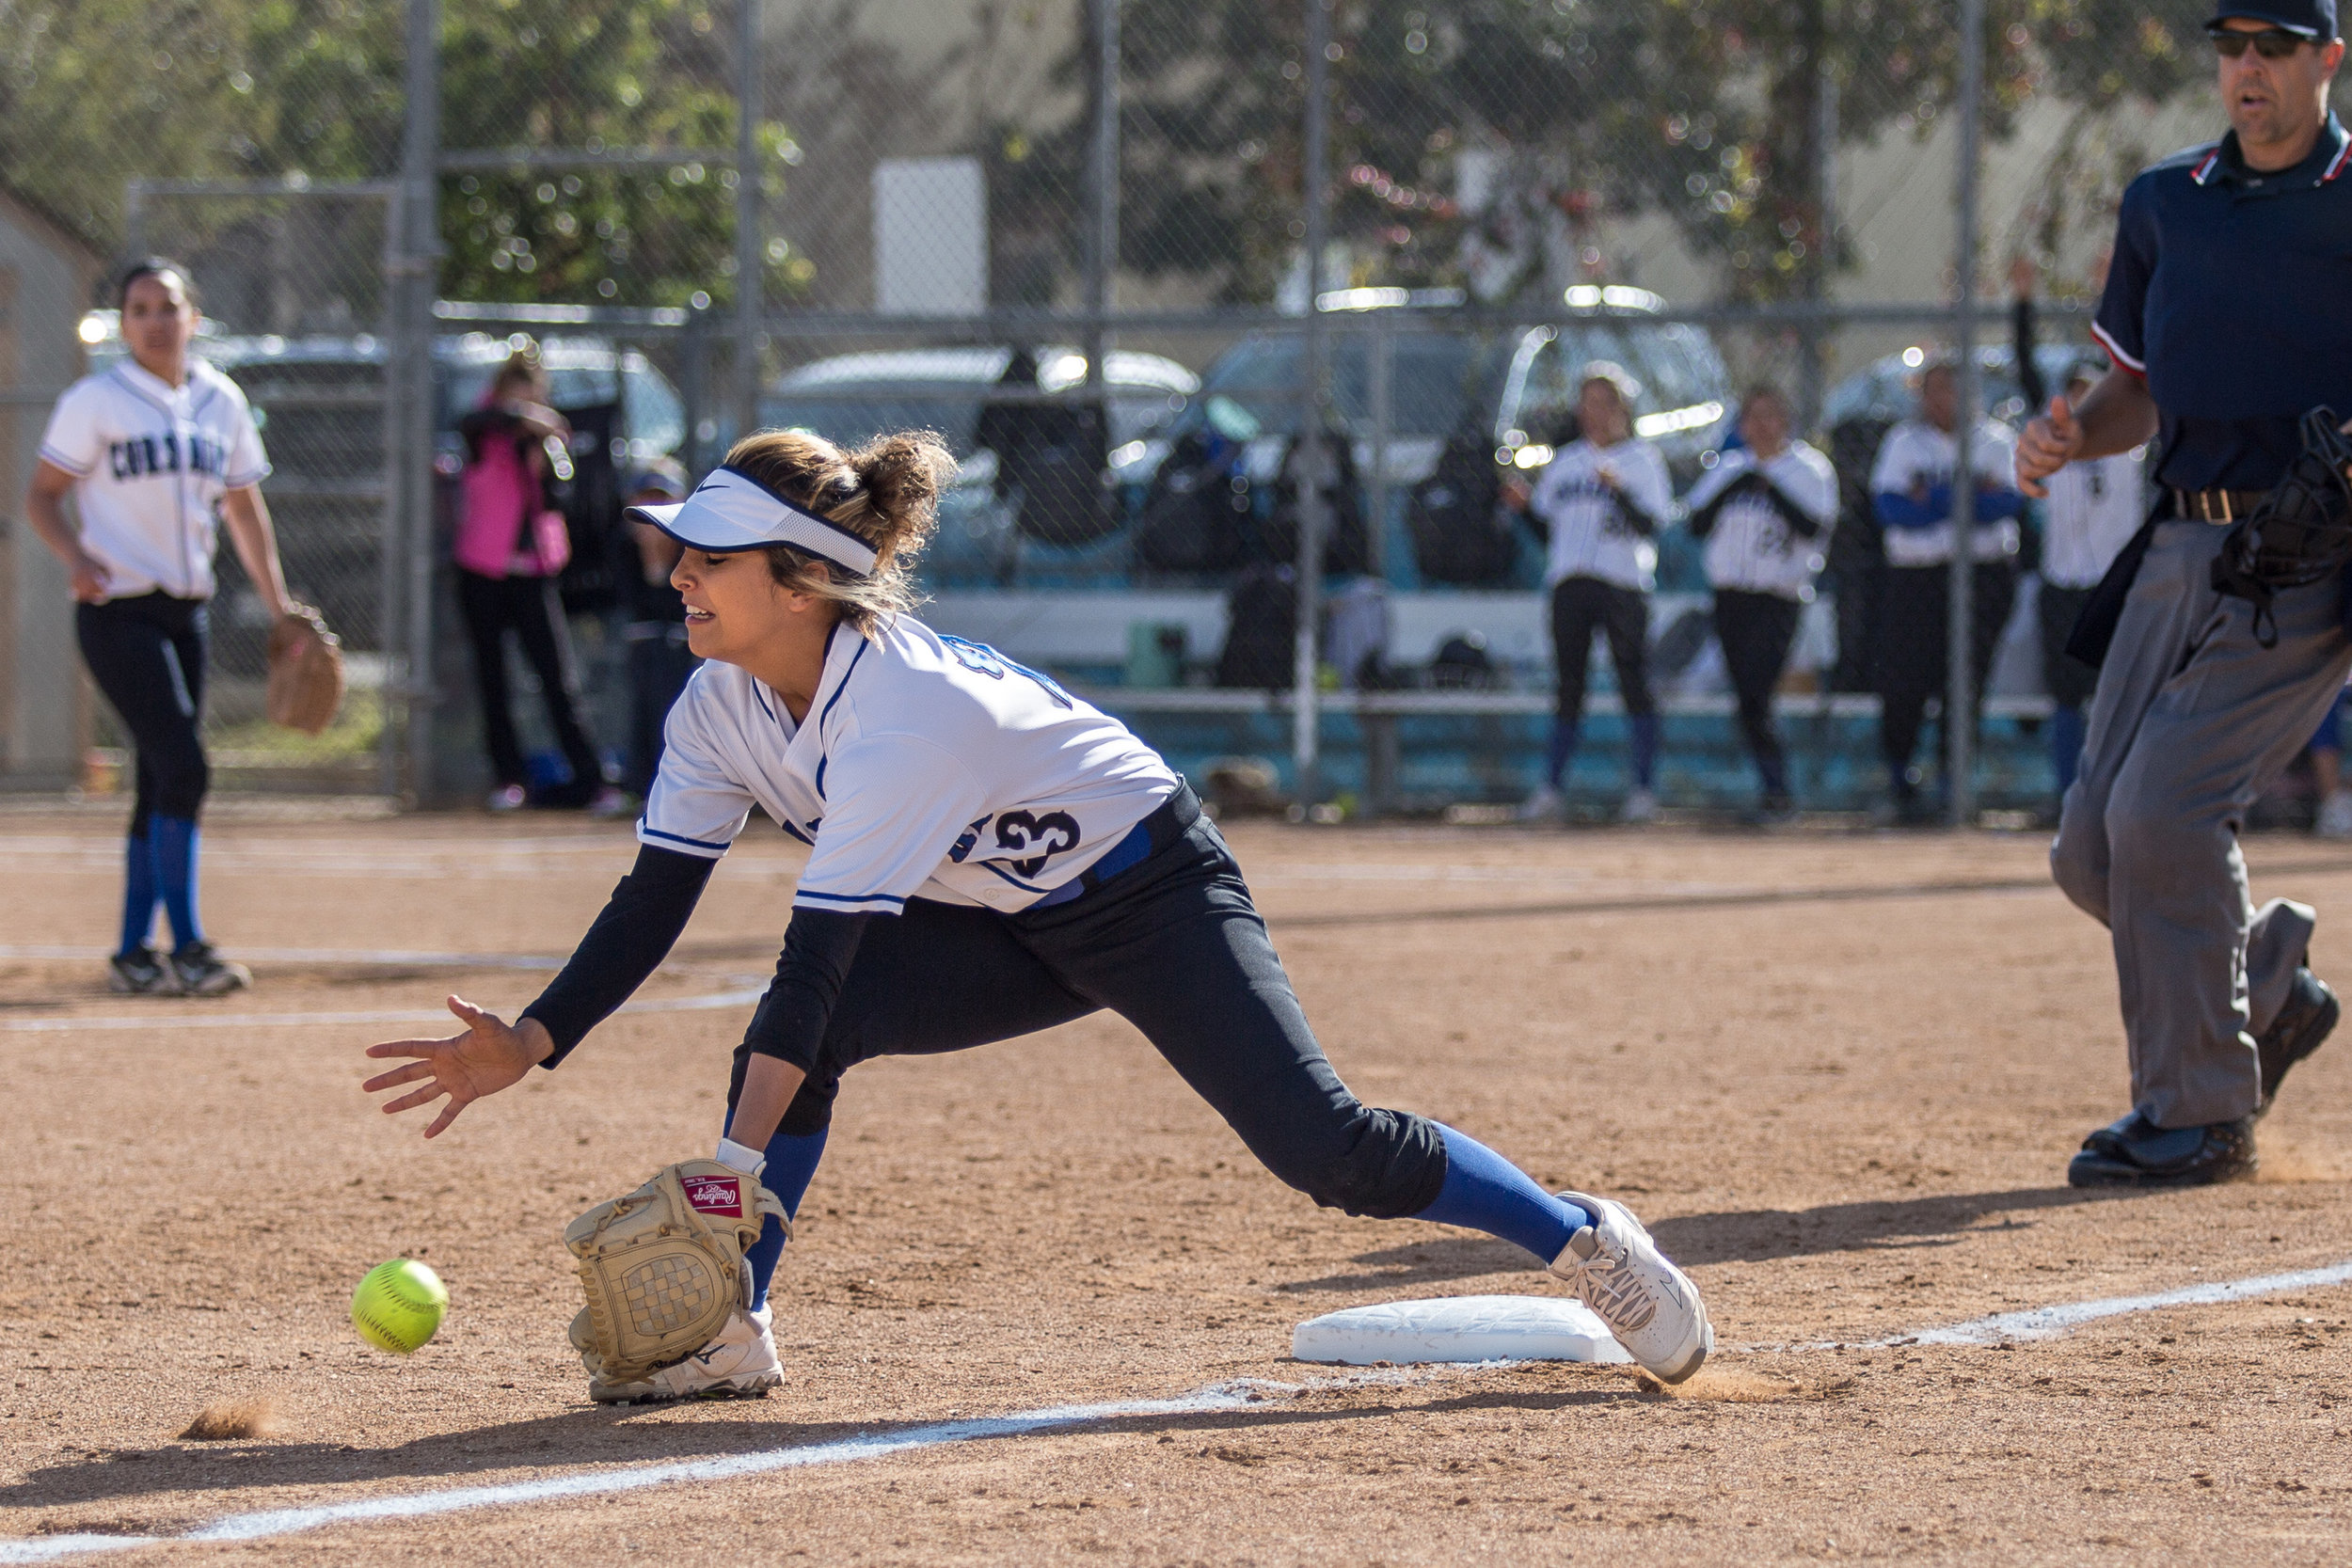  Santa Monica College Corsair freshman infielder Taylor Liebesman #23 (white) attempts to catch the throw from a Corsair outfielder during the top of the 3rd at the Corsair Field in Santa Monica California, on Tuesday, February 27 2018. The Corsairs 